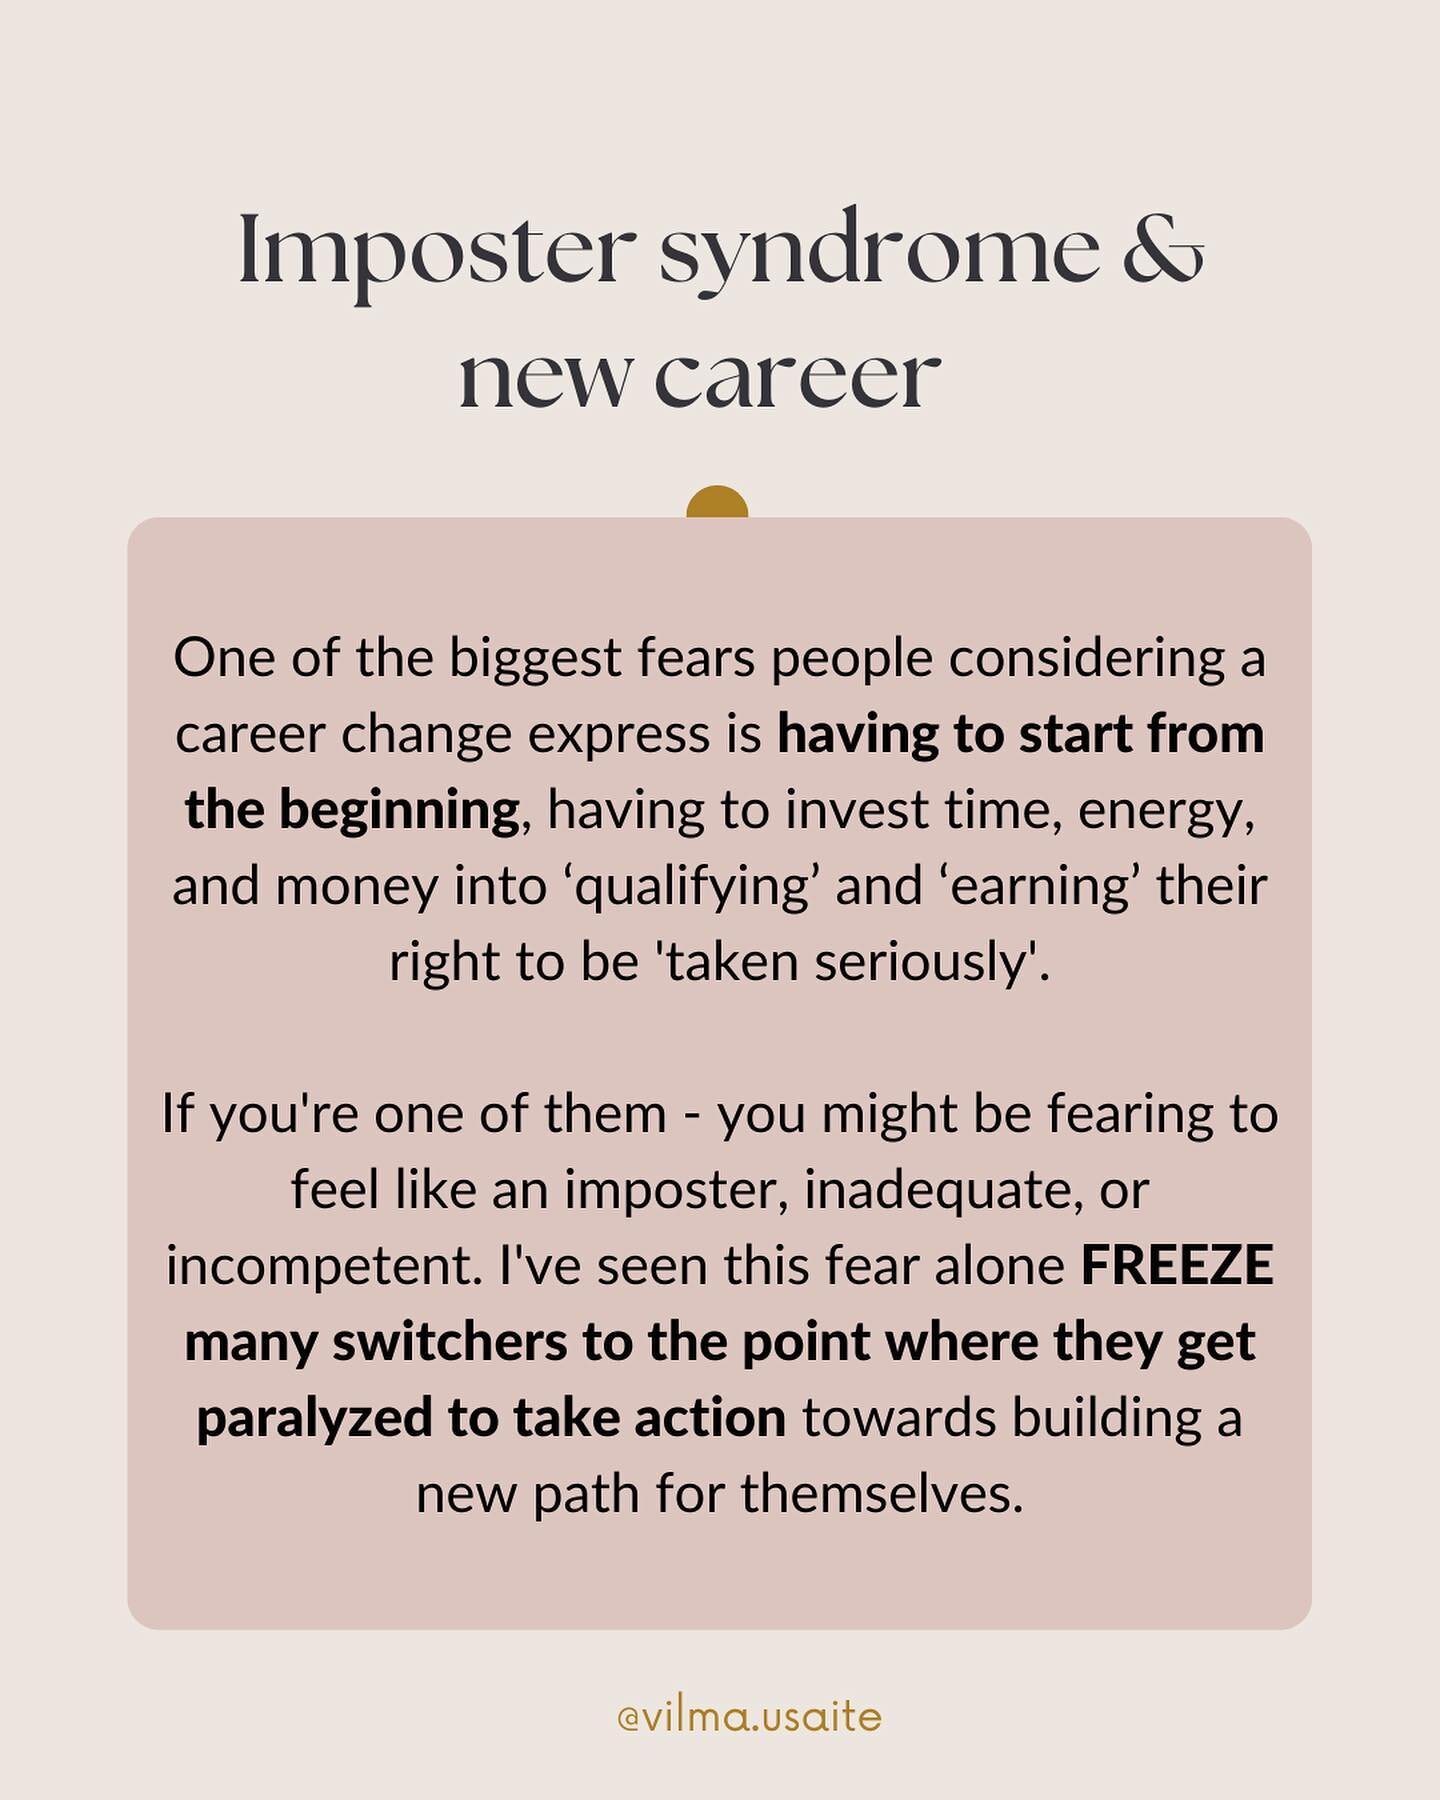 When you move into purpose, imposter syndrome becomes irrelevant.

#careeralignment #careerchanger #careerchangewithvilma #purposecoach #careerchange #purposerevolution #lifetransition #transition #careercoach #selfawareness #lifepurpose #findmypurpo